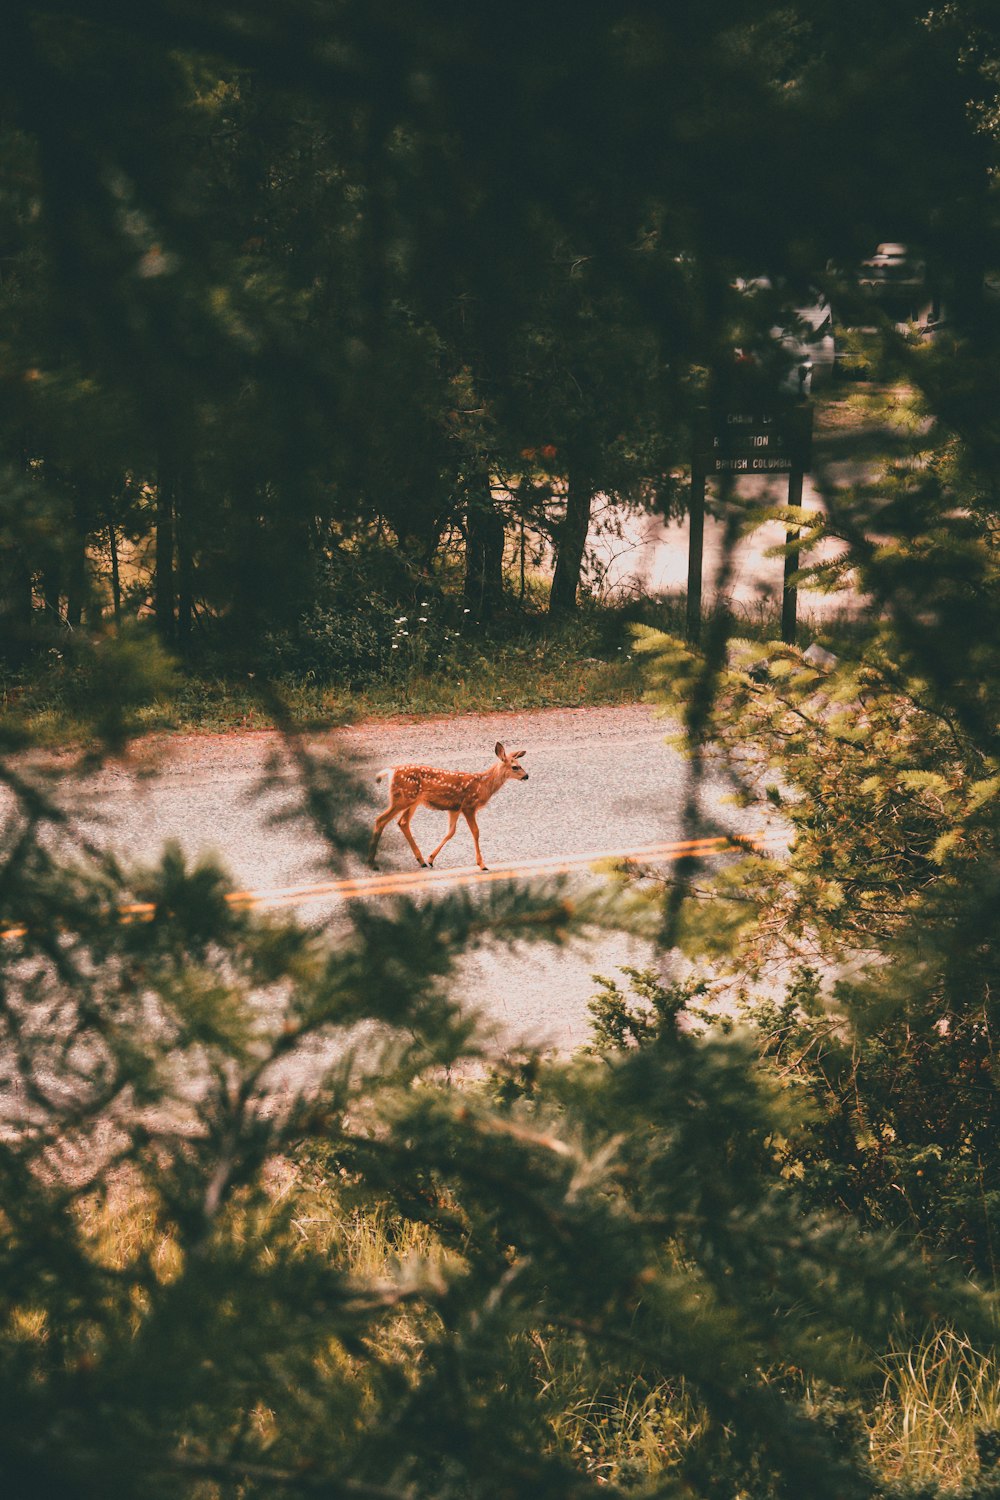 a deer crossing a road in the middle of a forest